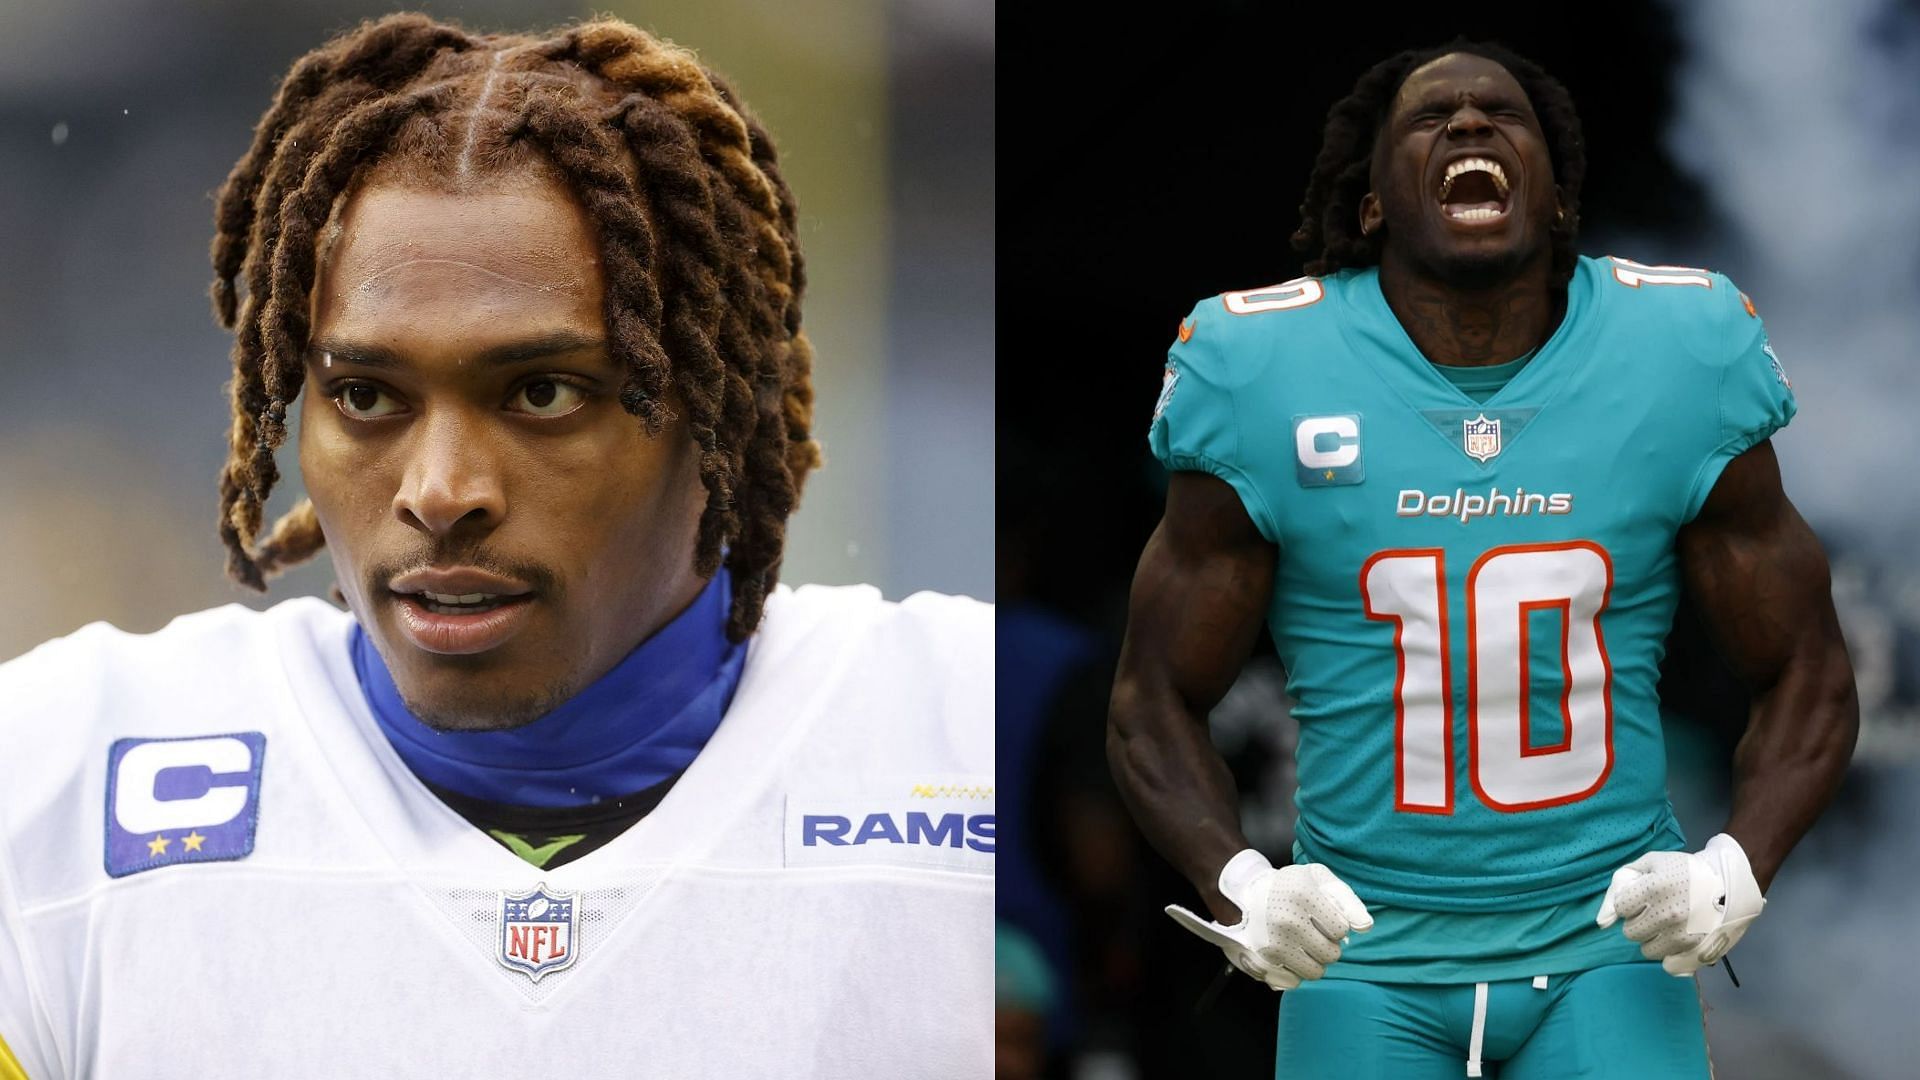 Hill has issued a light-hearted warning to Jalen Ramsey following his move to Miami.